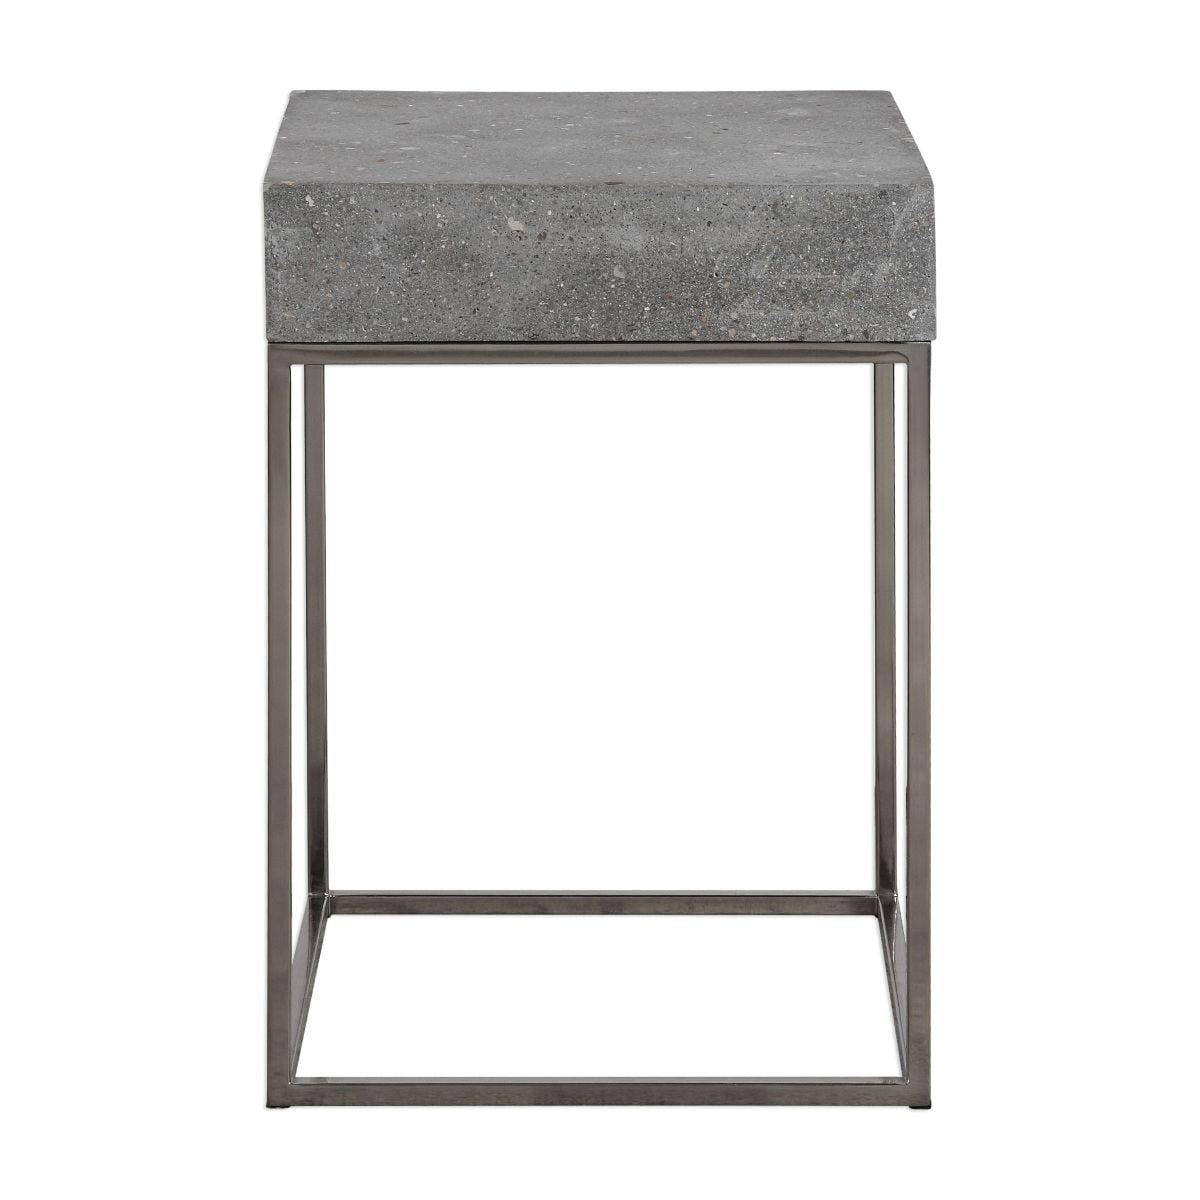 Jude Industrial Gray Concrete and Steel Square Accent Table